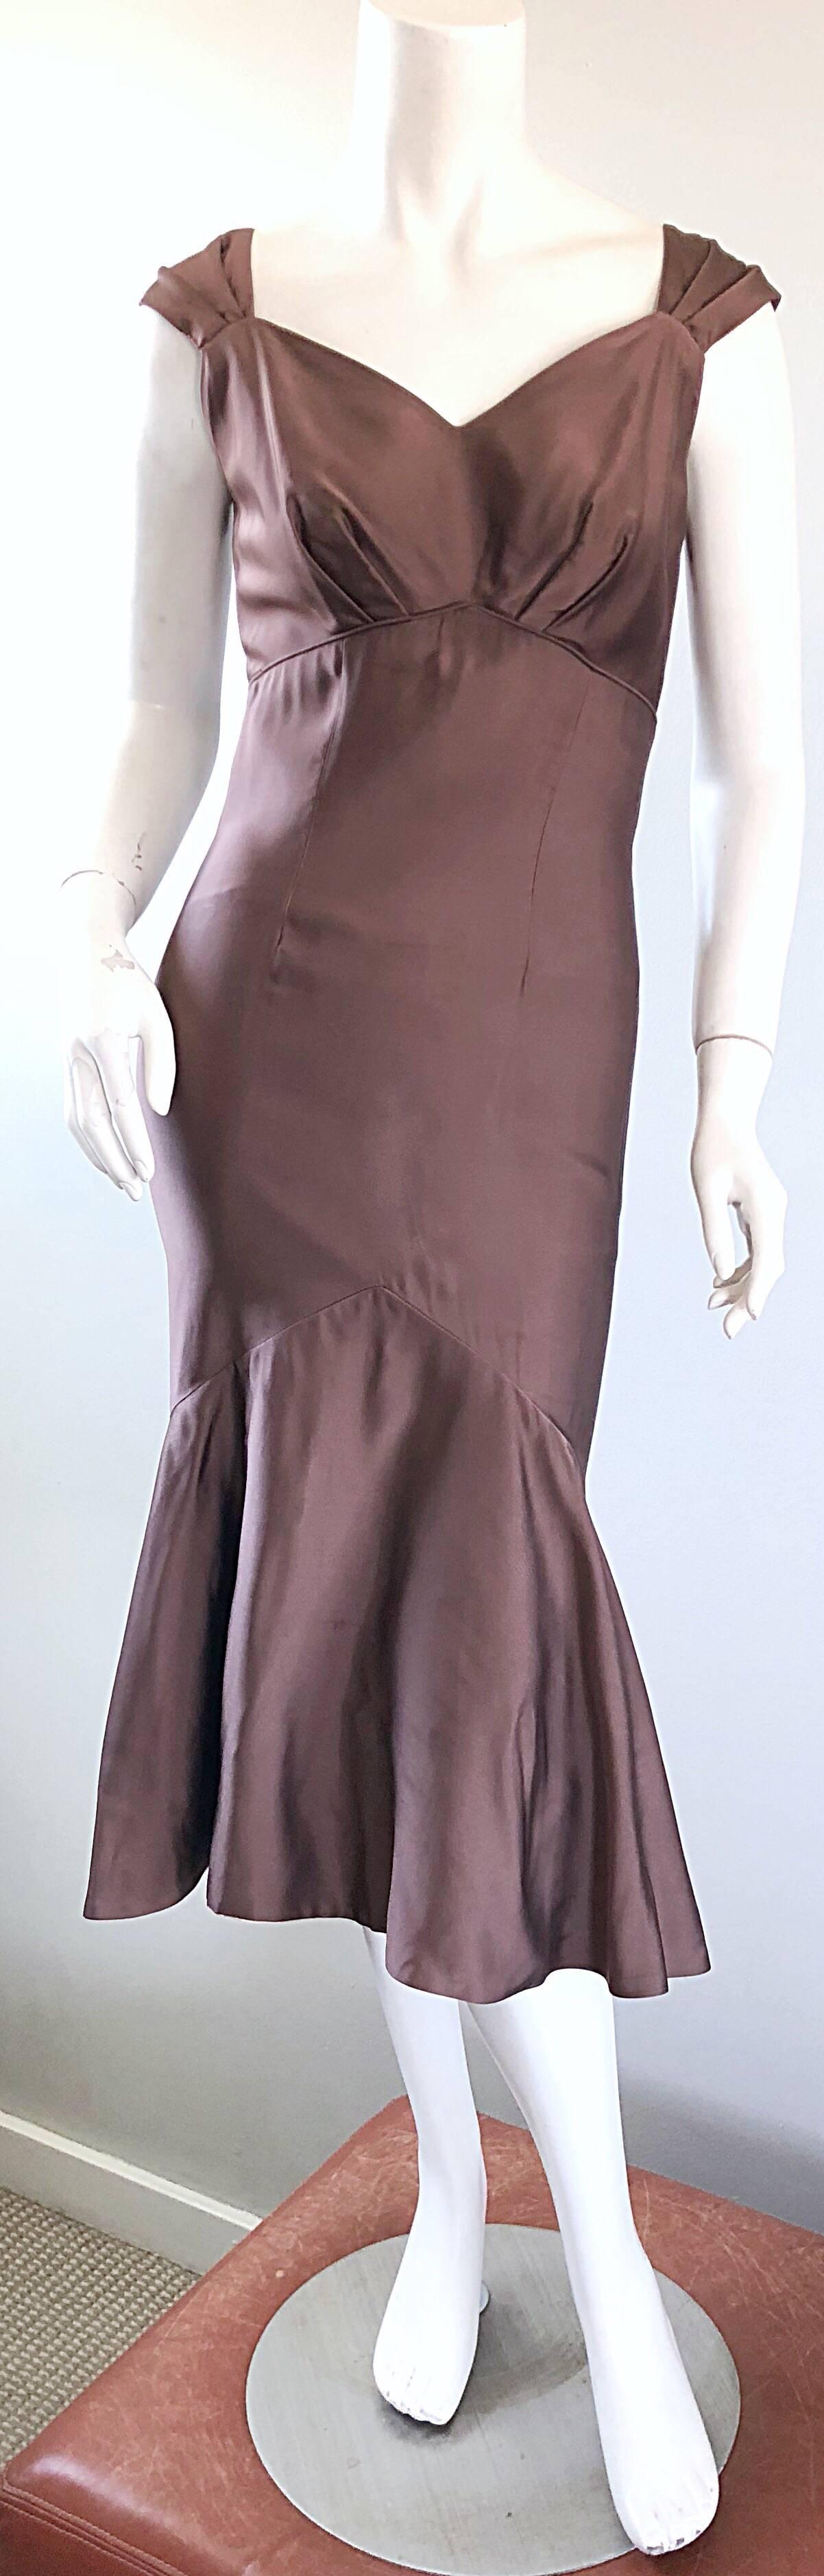 Gorgeous 1950 HALMAR demi couture taupe / light brown silk mermaid hem cocktail dress! Features a tailored fitted bodice and body, with a remarkable flared hem. Hem features an attached interior crinoline for extra flare. Sweetheart neckline with